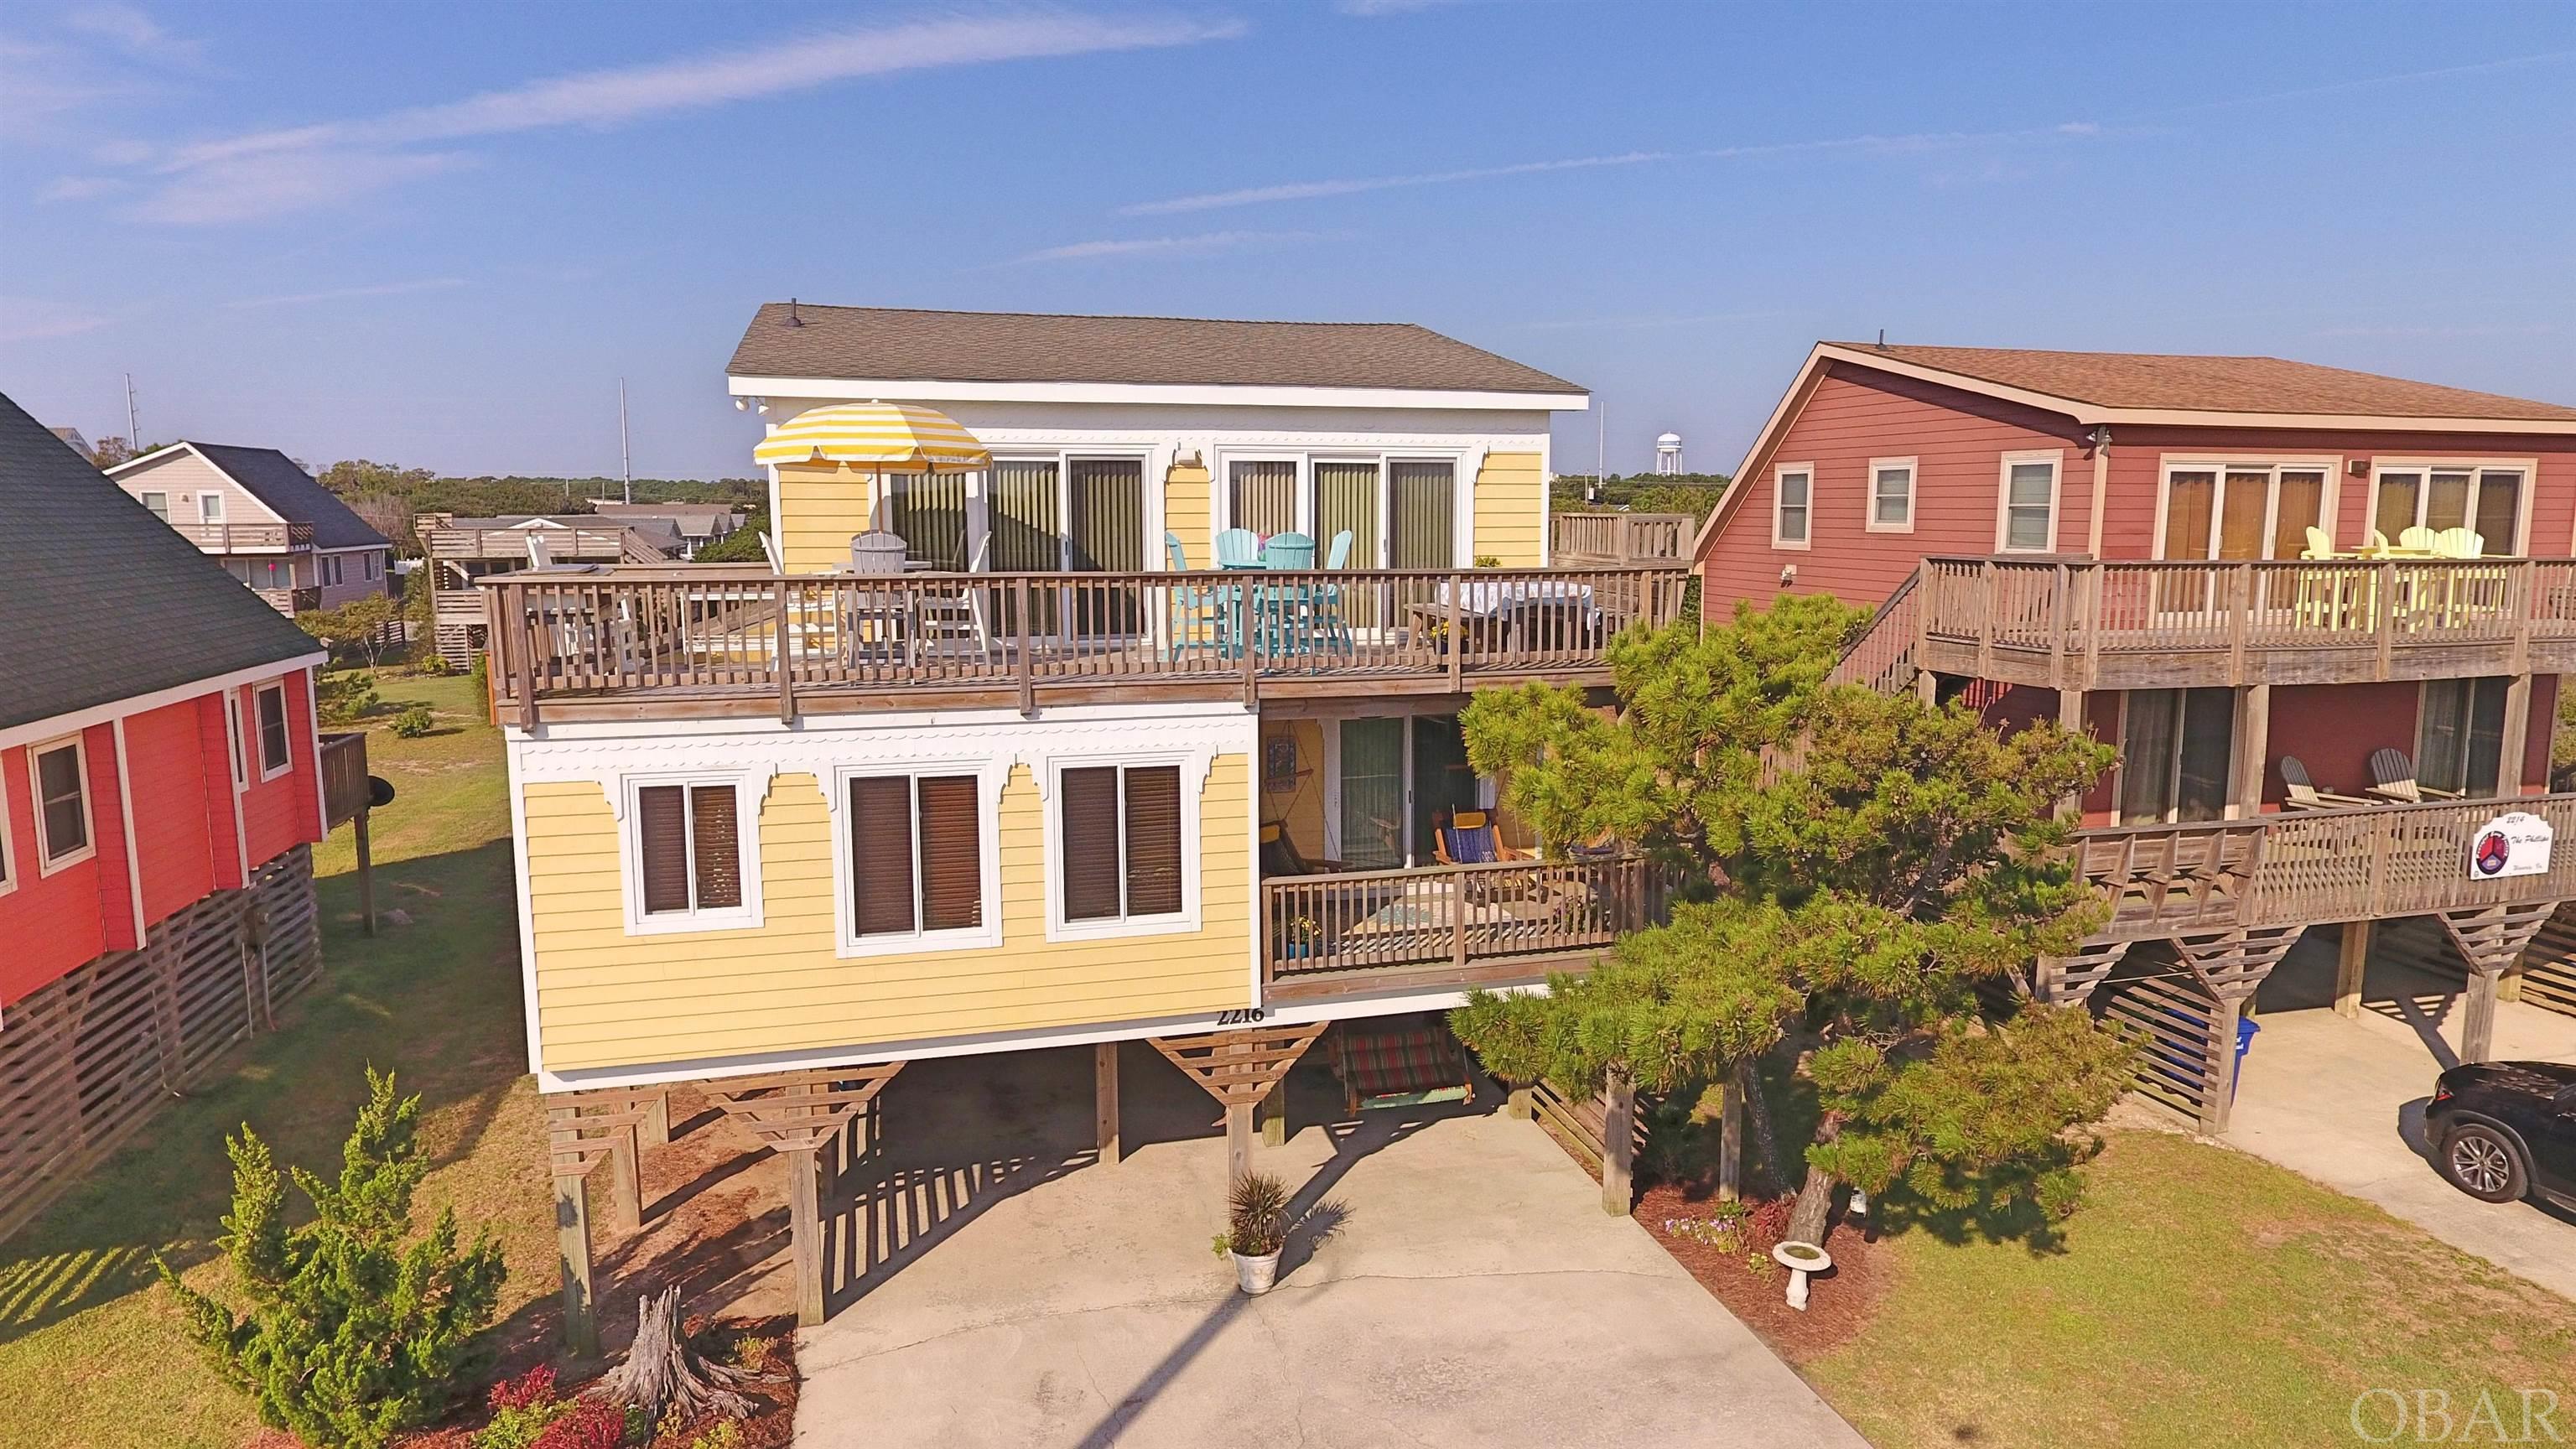 Over-the-top upgrades makes this the WINNER.  All the charm of a beach cottage with improvements suited for year round living!  This home has exceptional ocean views and is centrally located near shopping, dining, and of course, the beach!  The Owners have transformed it to a seasonal primary home for the summer months.  The reverse floor plan allows panoramic views from the main living area.  The expanded sun deck runs the length of the home and features durable wood composite furnishings.  Rich custom cabinetry, Silestone counters & backsplash, and GE stainless appliances grace the fully remodeled kitchen.  Hardwood flooring runs throughout the home, with distinctive ceramic tile in baths and kitchen/dining area.  Attic space has been converted to expand the living area with an attractive reading nook and bonus room off of the powder room.  Head down a flight of stairs, where all four bedrooms are located.  The primary suite was expanded in 2016 to include a sumptuous floor-to-ceiling marble walk-in shower, custom dual sink vanity and pendant lights, and upscale oiled bronze fixtures.  The personalized walk-in closet keeps everything in easy reach.  A slider door opens to the cheerful  covered deck, complete with Nags Head Hammock swings and a gate to keep pets by your side.  The second bedroom also opens to the covered deck and accesses a Jack and Jill bath between the two easterly bedrooms.  Two additional bedrooms on the west side also share a common bath.  Of course, the Outer Banks is all about outdoor enjoyment, and this home features a sunny ground level patio, breezy carport with swing and picnic table and an inviting outside shower. The ground level storage room houses washer, dryer, and a separate lockable room with second refrigerator.  Quality furnishings convey with just a few exclusions.  The owners have been fastidious caretakers, with all new exterior decking & stairs, new roof, new cedar lap siding, new plumbing, new HVAC, new hurricane impact windows and doors in the last 10 years.  Rental projection on file for over $65K, add a pool for almost $80K!   Ask for a complete list of improvements.